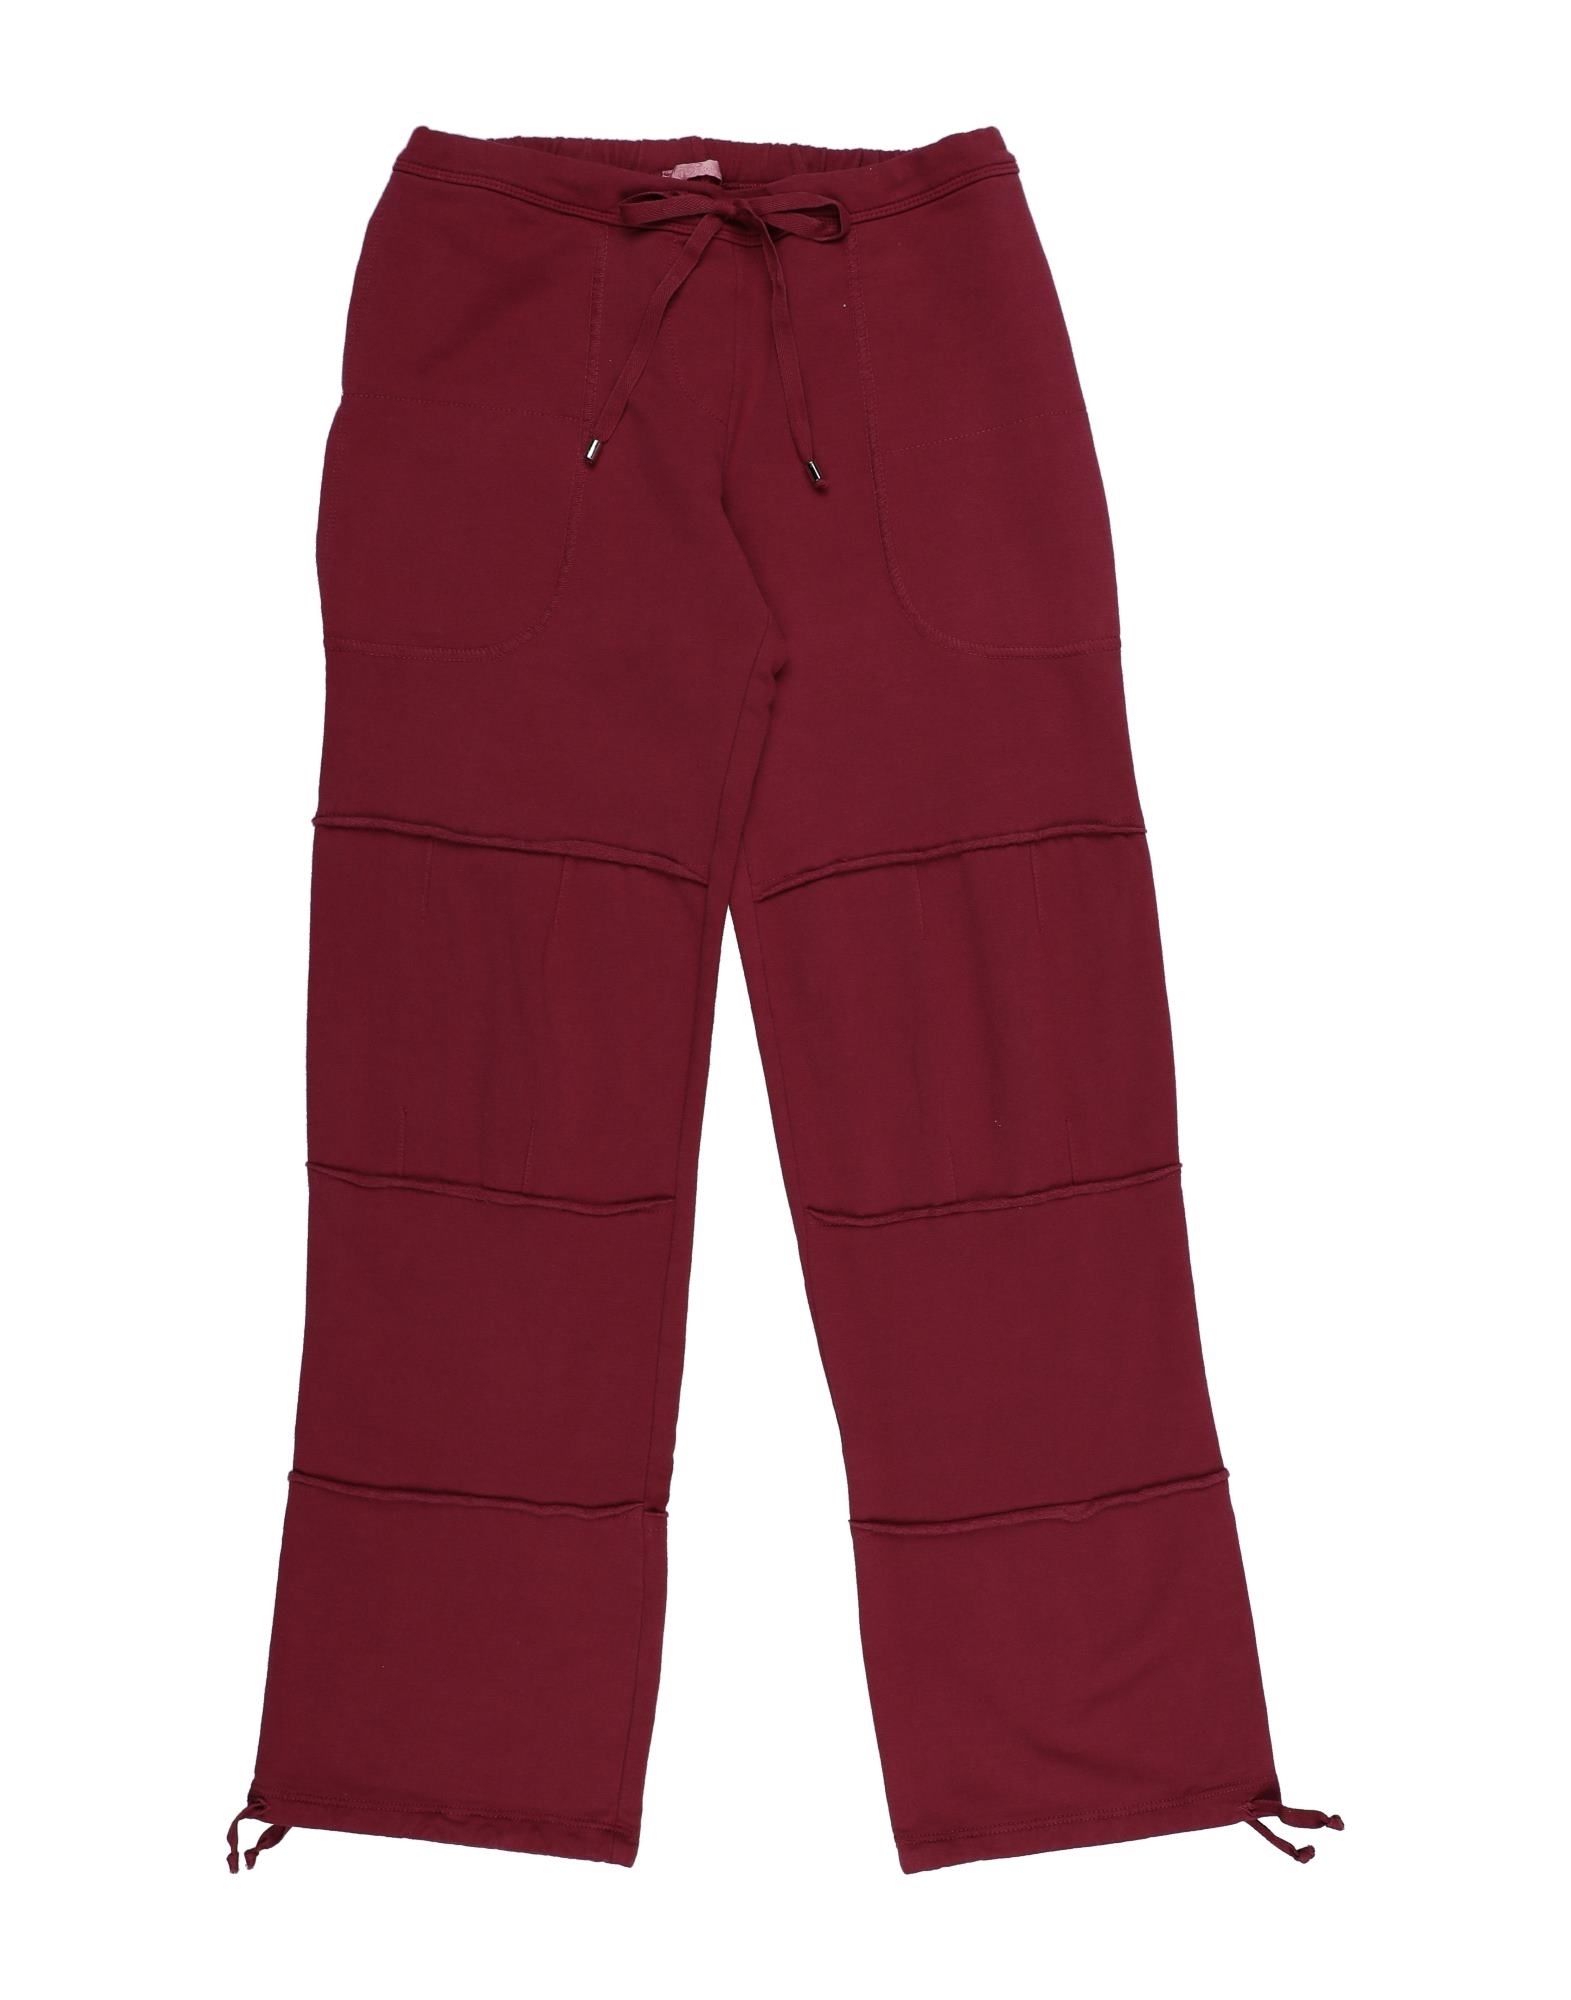 Ki6? Who Are You? Kids'  Casual Pants In Maroon